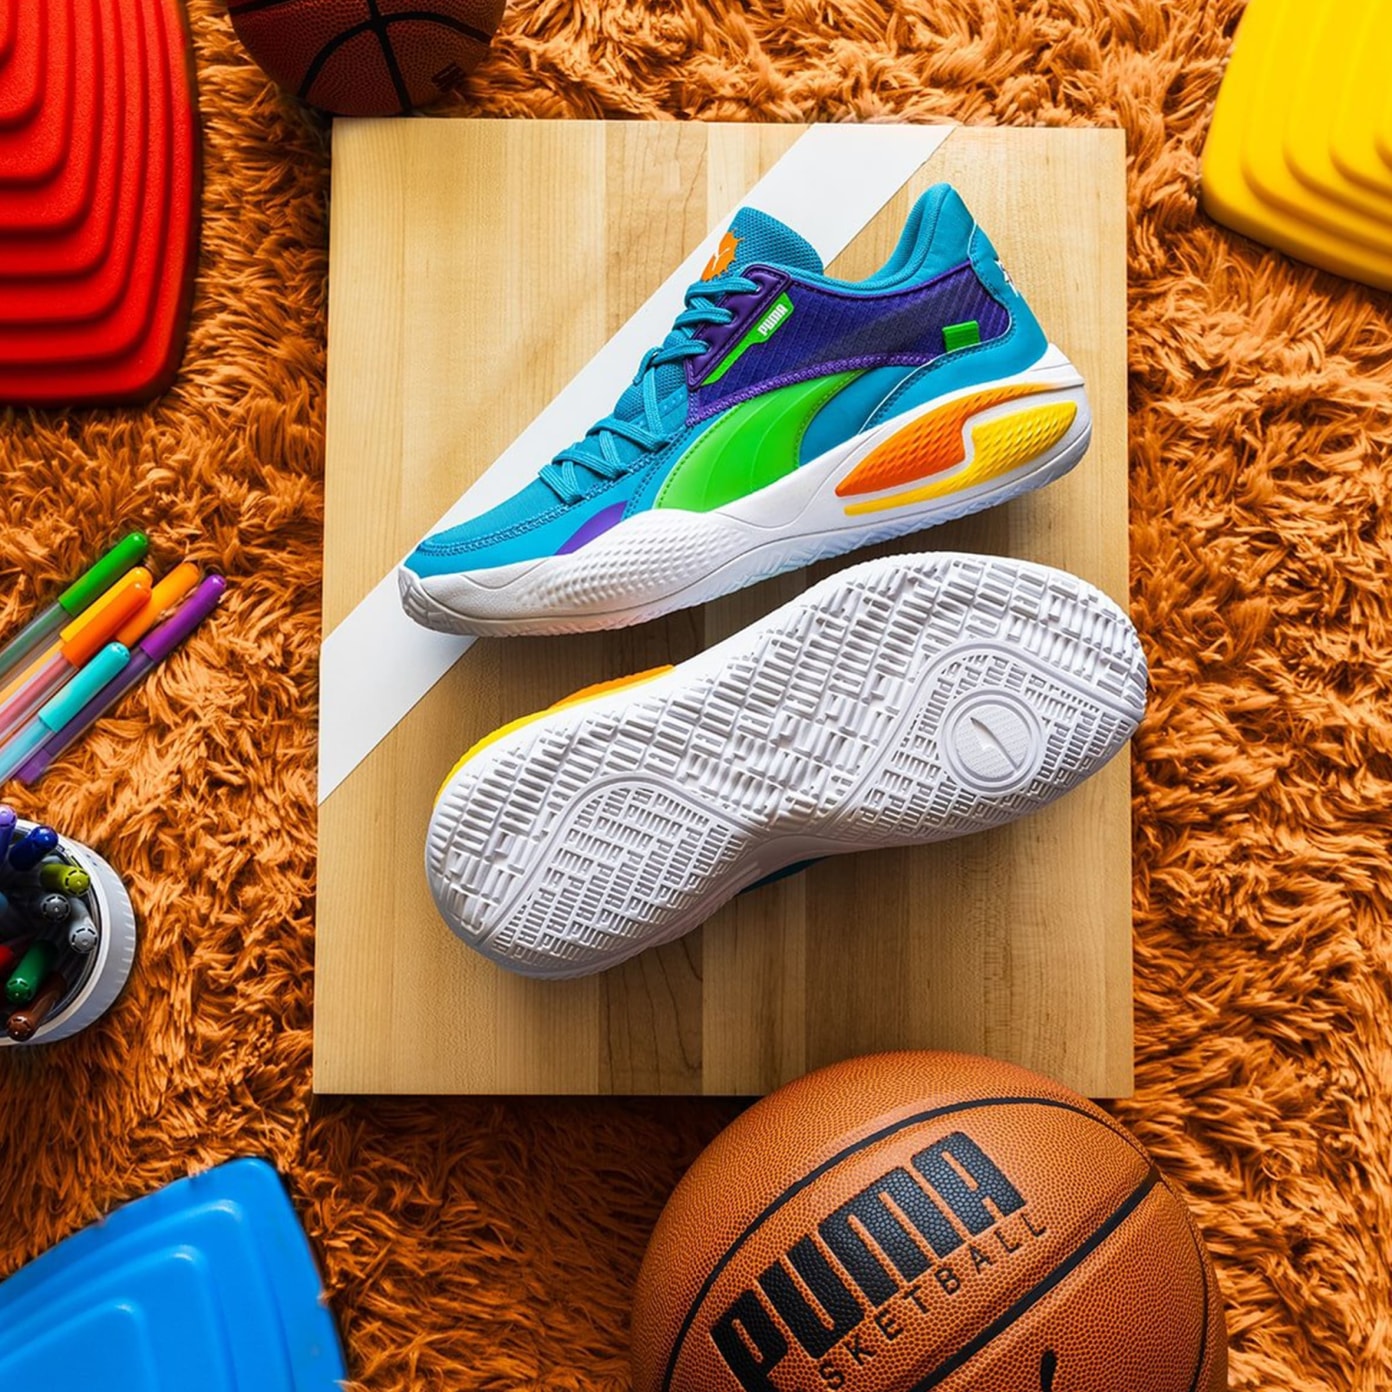 Swag Craze: First Look: PUMA x Rugrats Collection